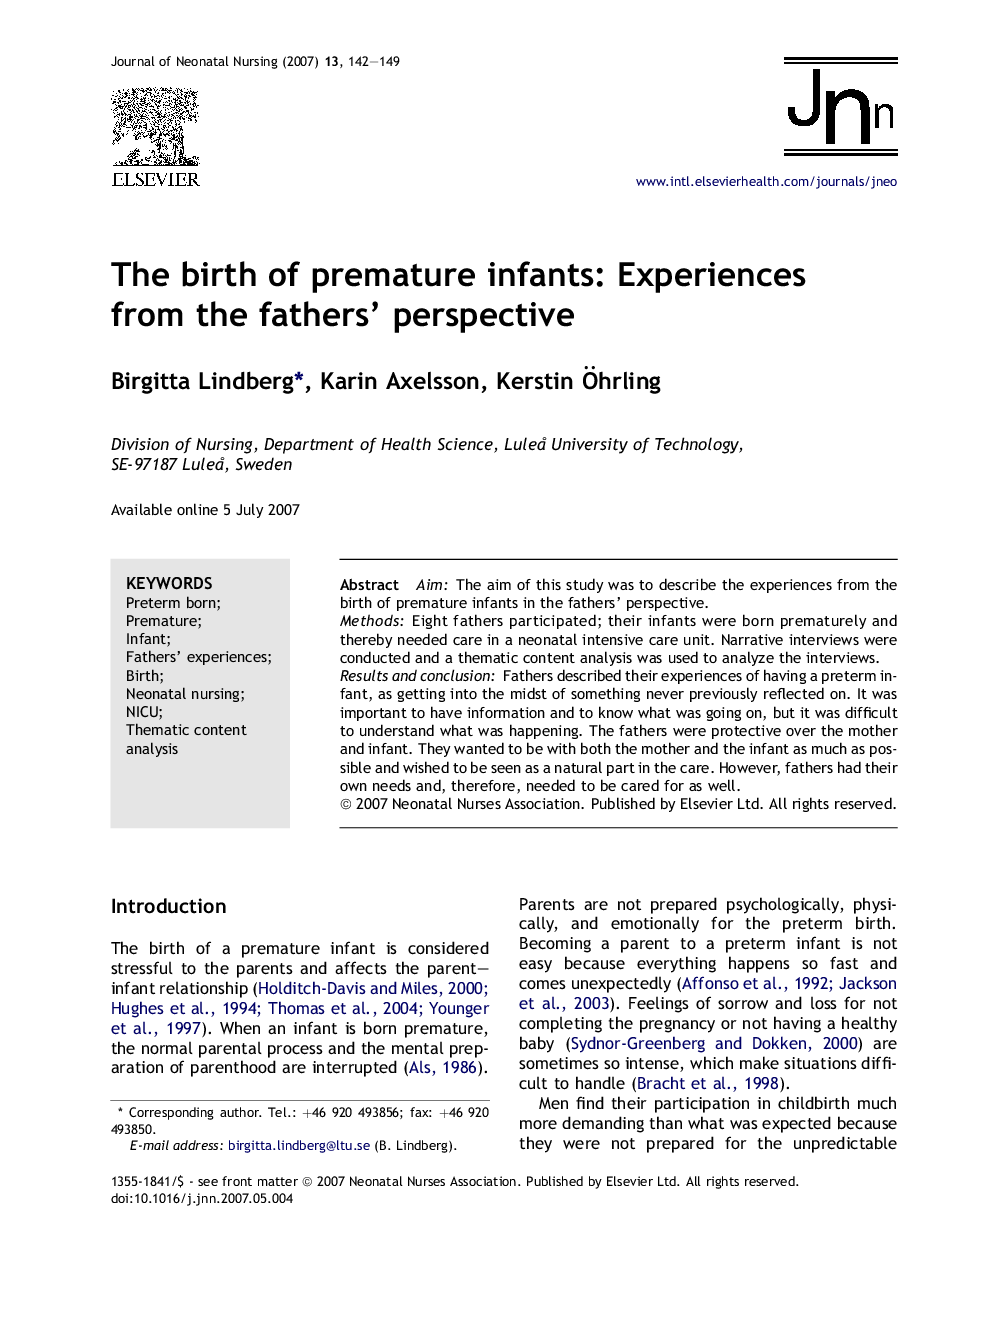 The birth of premature infants: Experiences from the fathers’ perspective